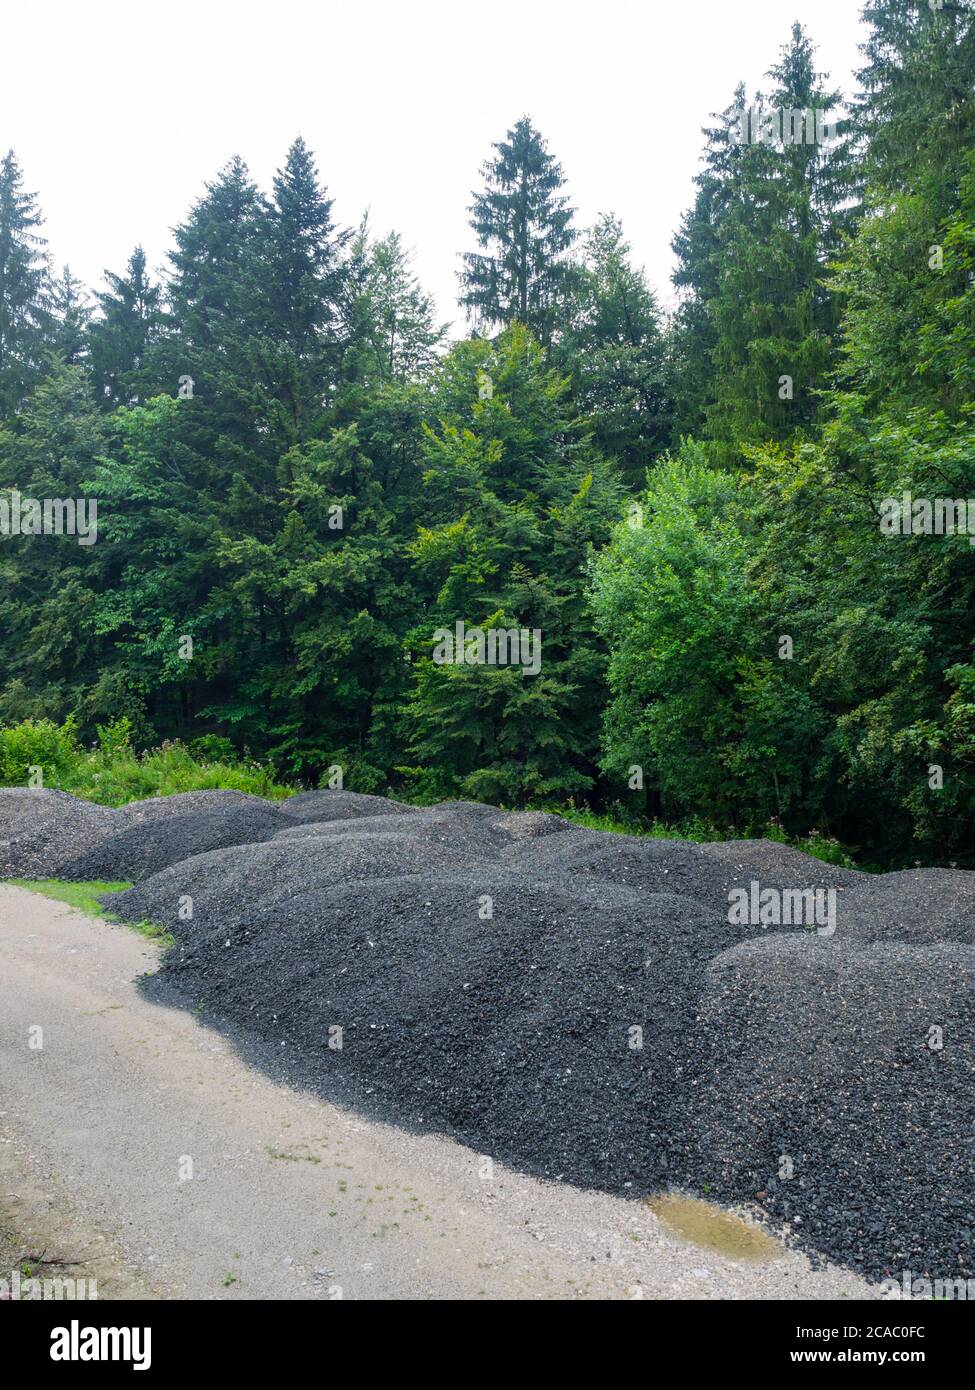 Piled asphalt in natural environment for further road construction Stock Photo